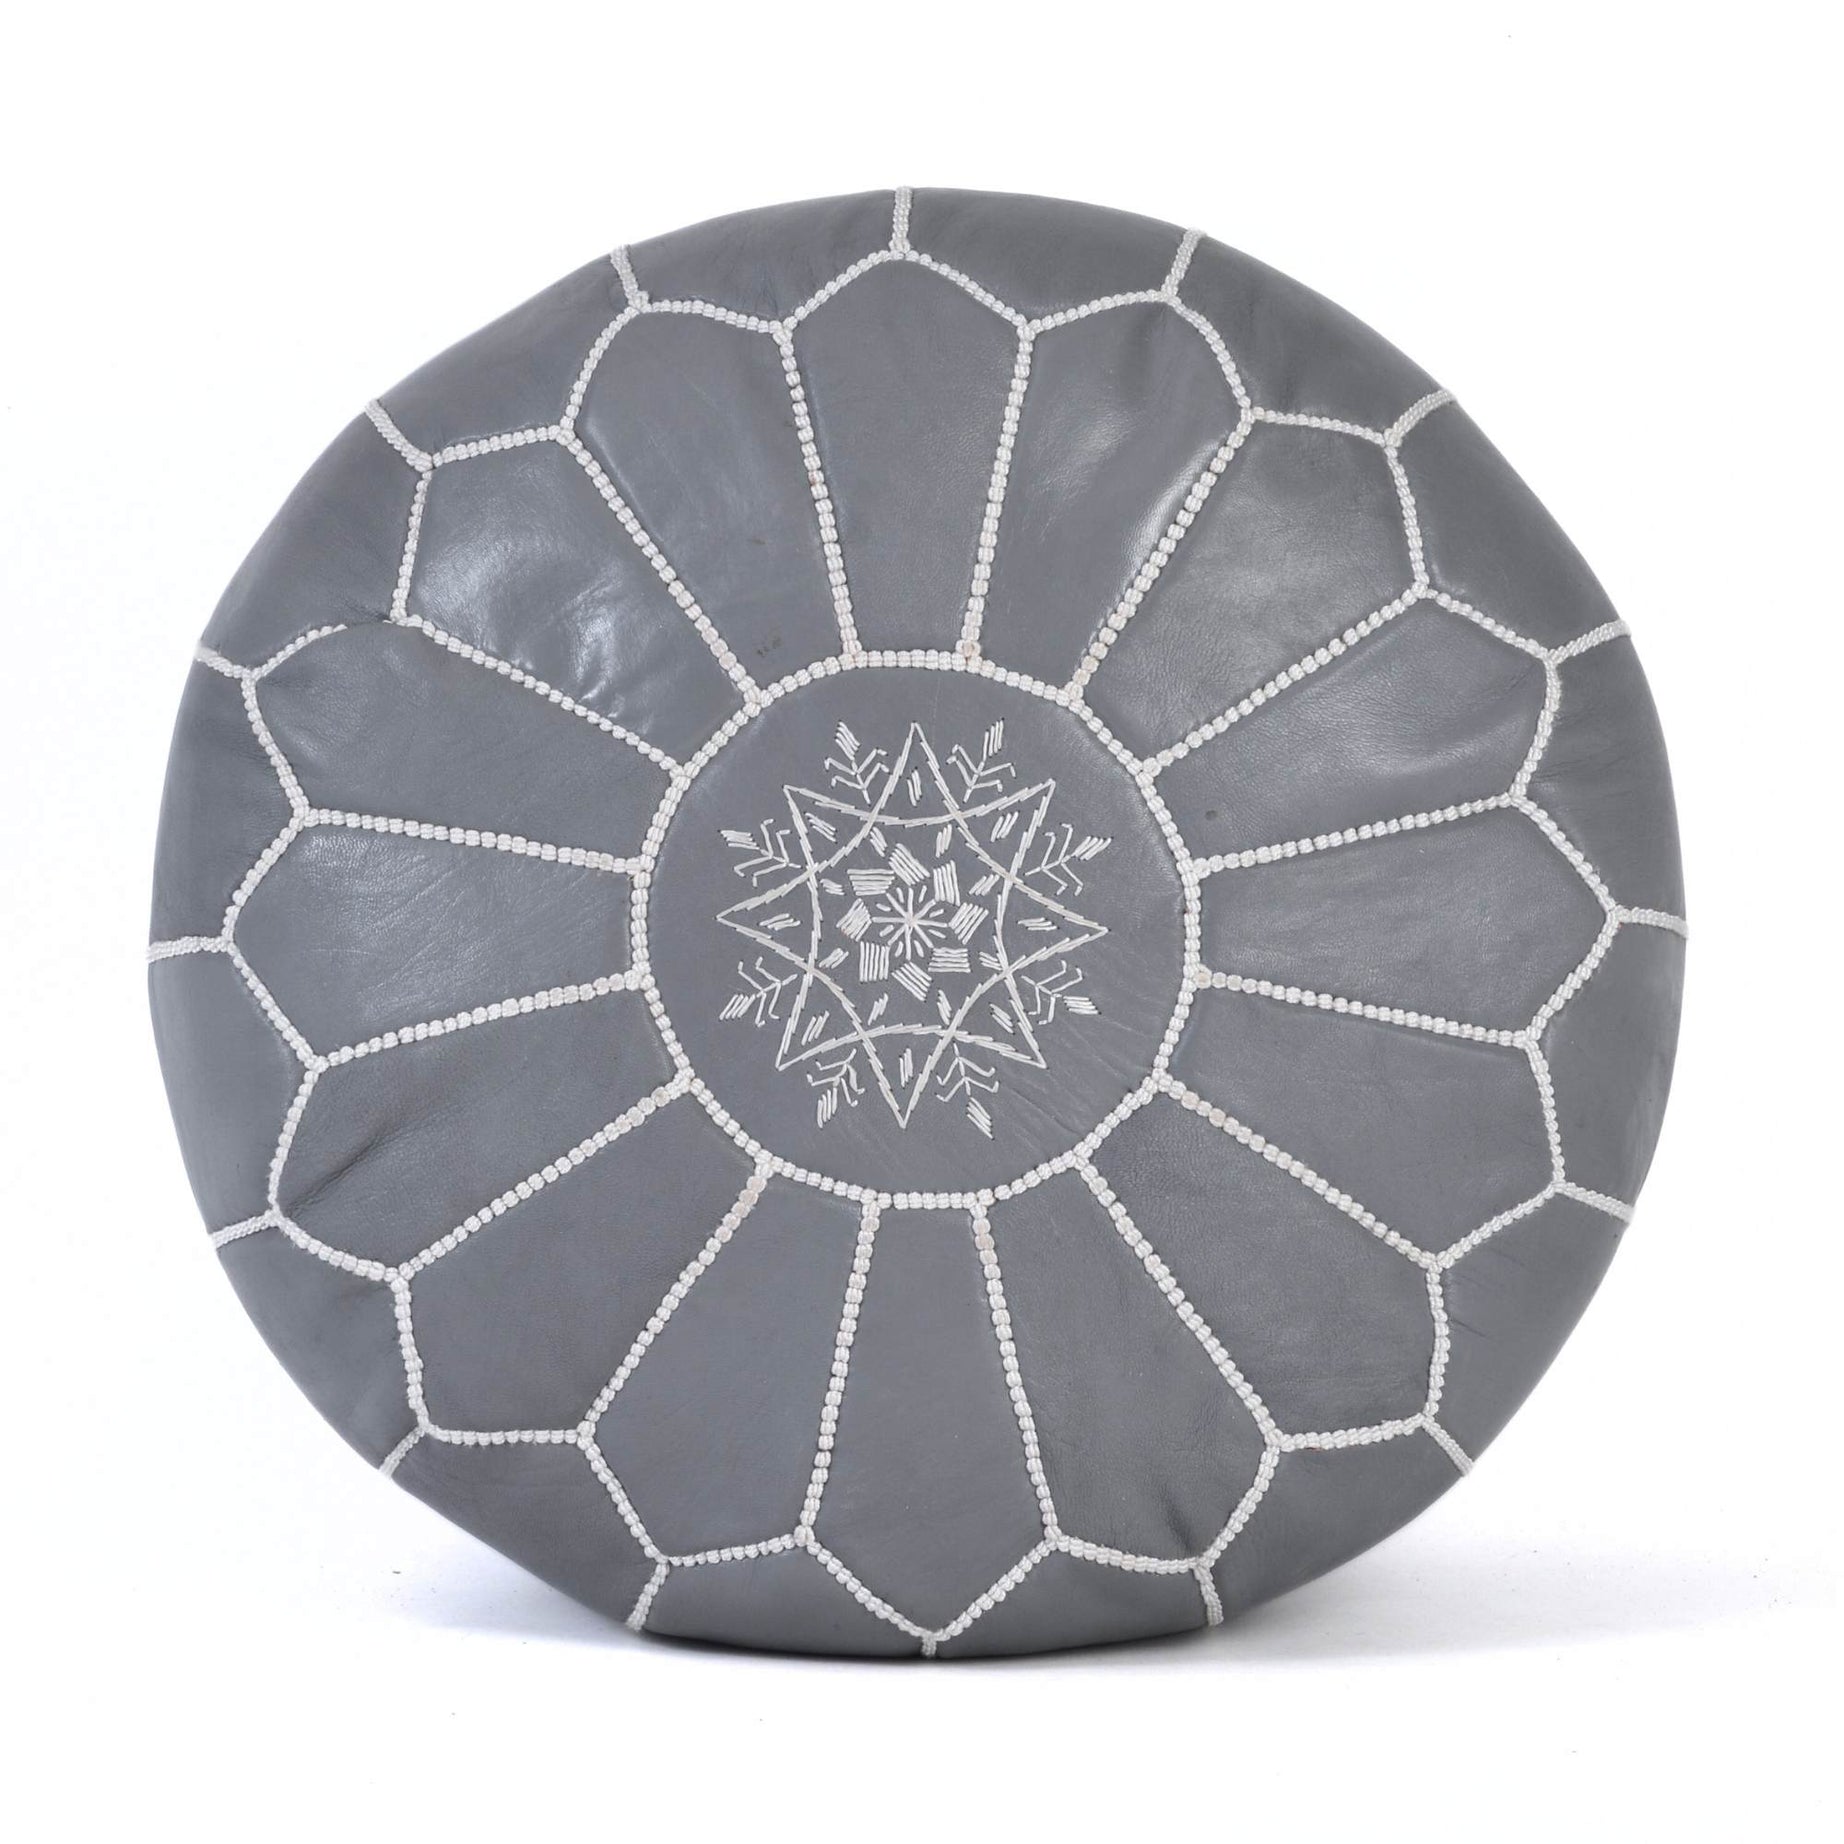 Hand-stitched Embroidery Genuine Leather Ottoman Pouf - Gray White